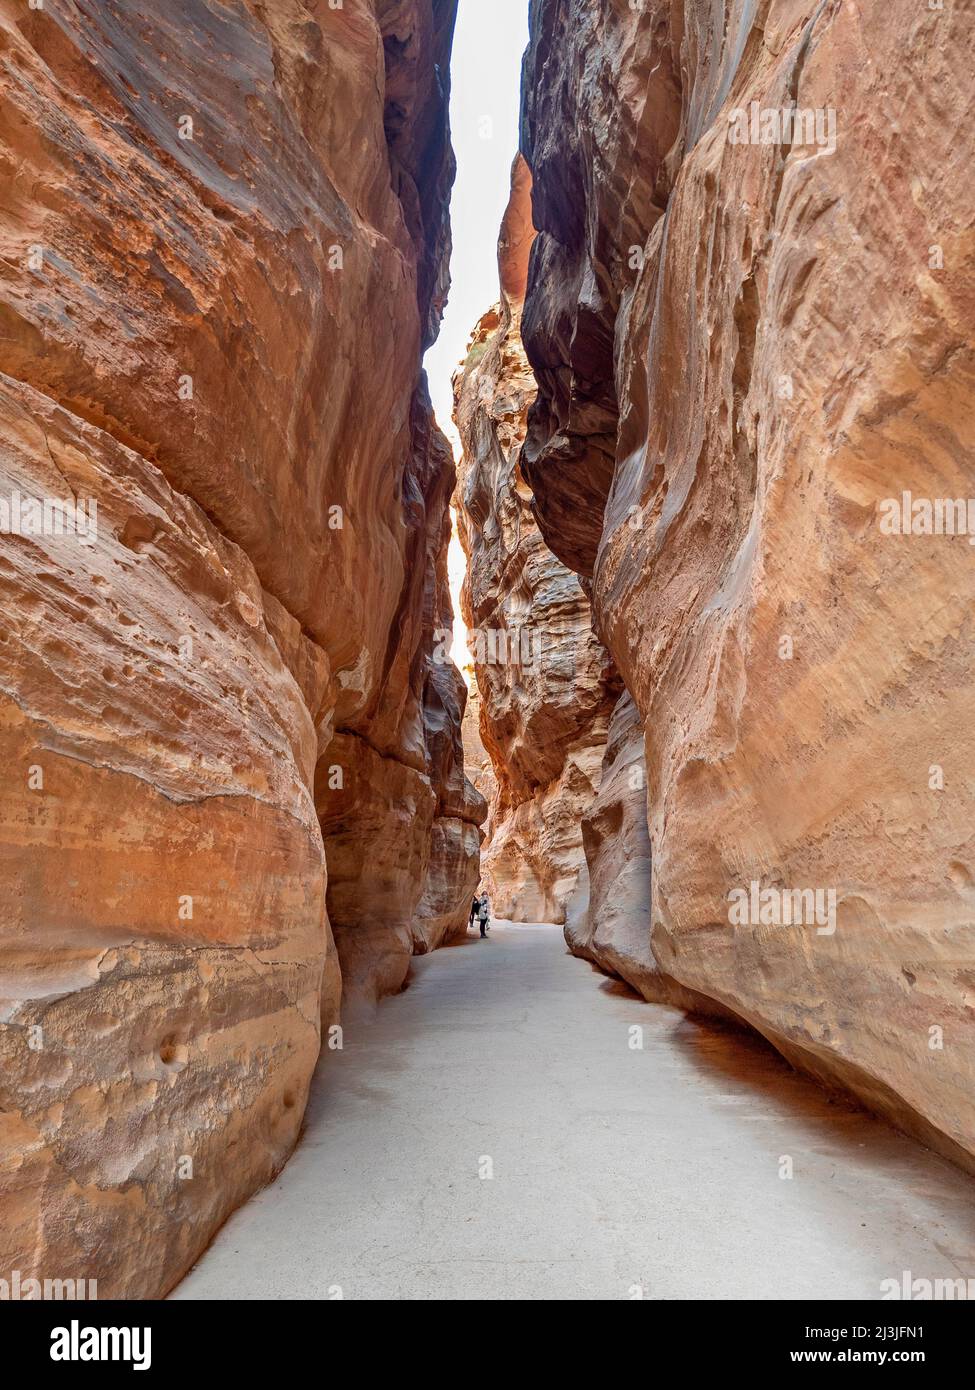 In the canyon that leads to the famous ancient Treasury of Petra, in Jordan, Middle East, Asia, one of the most exciting touristic attractions ever. Stock Photo